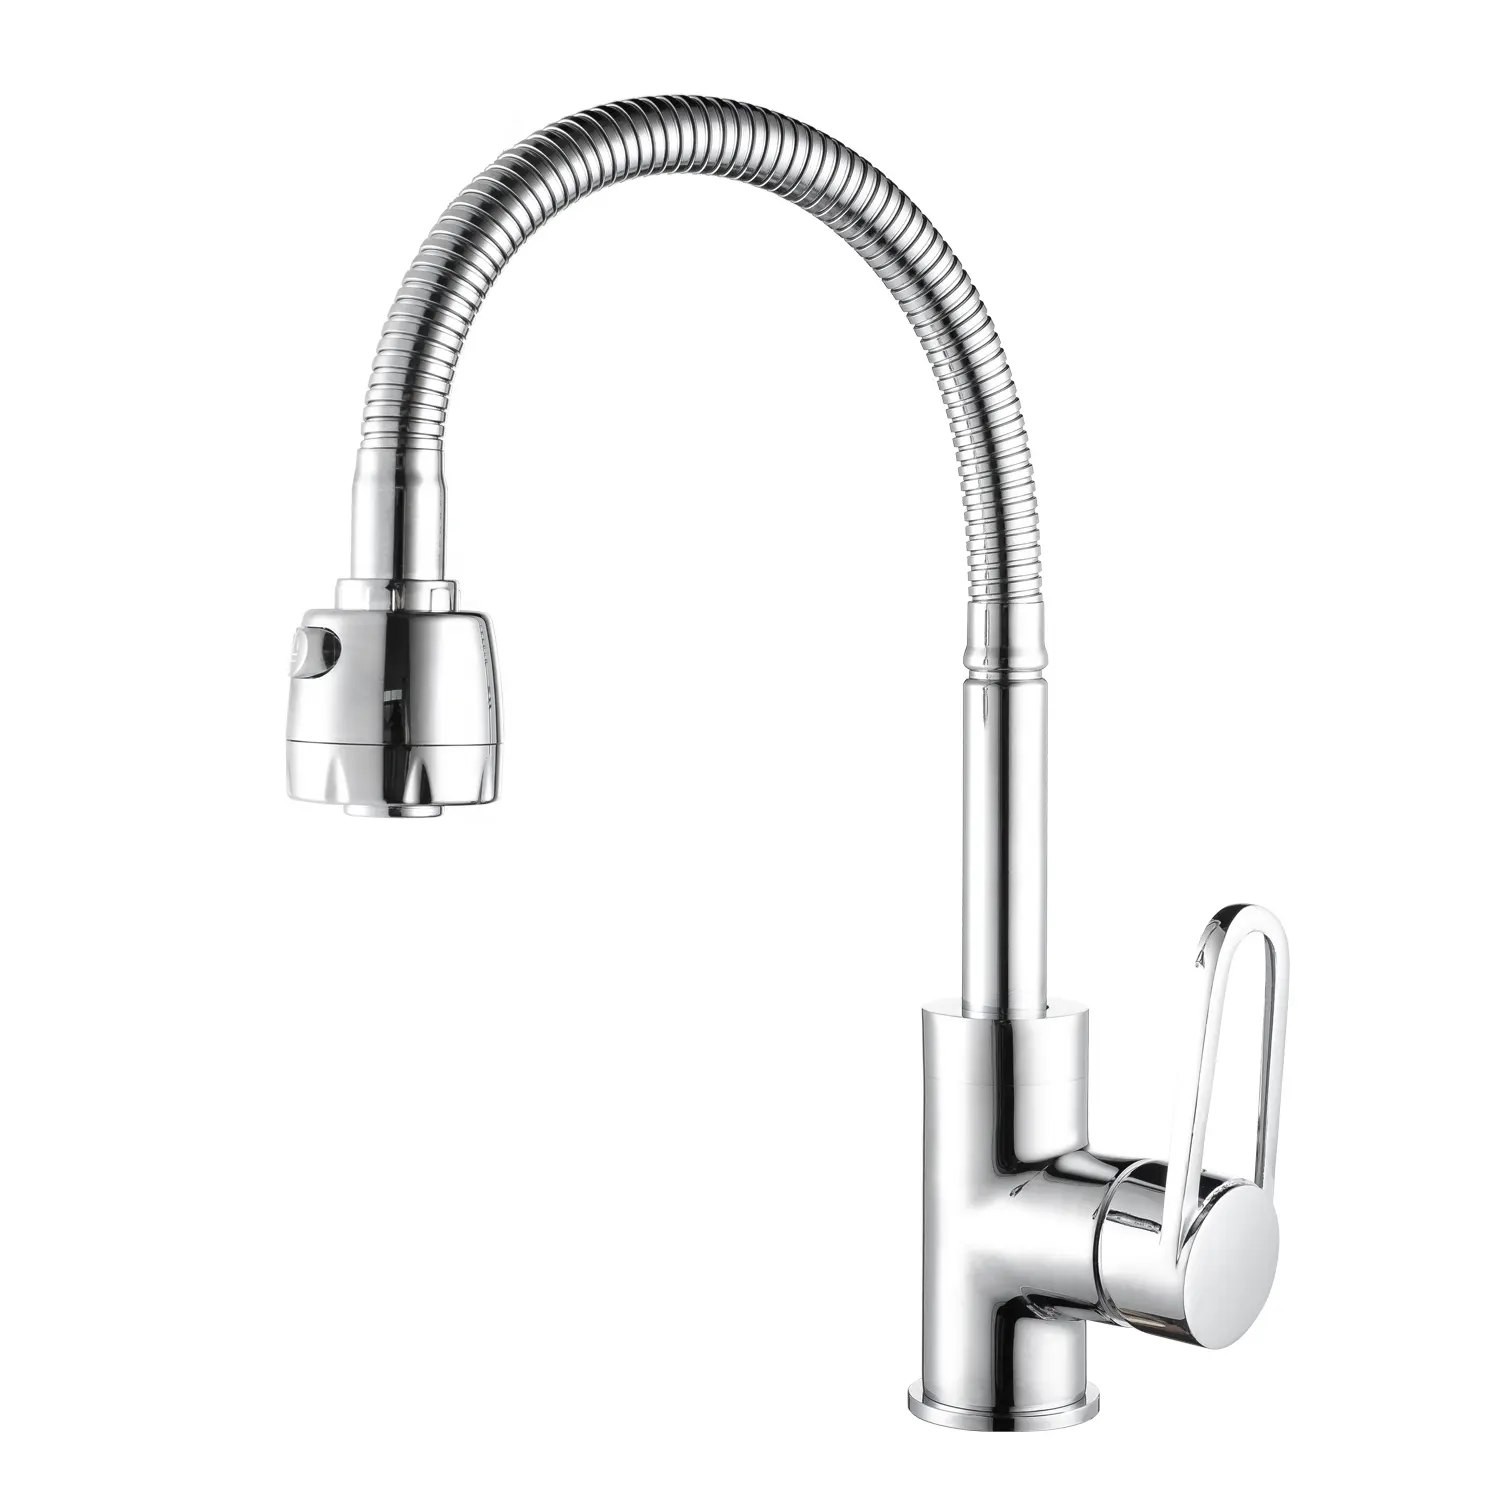 TB-4028 Brass high quality hot and cold kitchen sink faucet new design long flexible hose neck tap